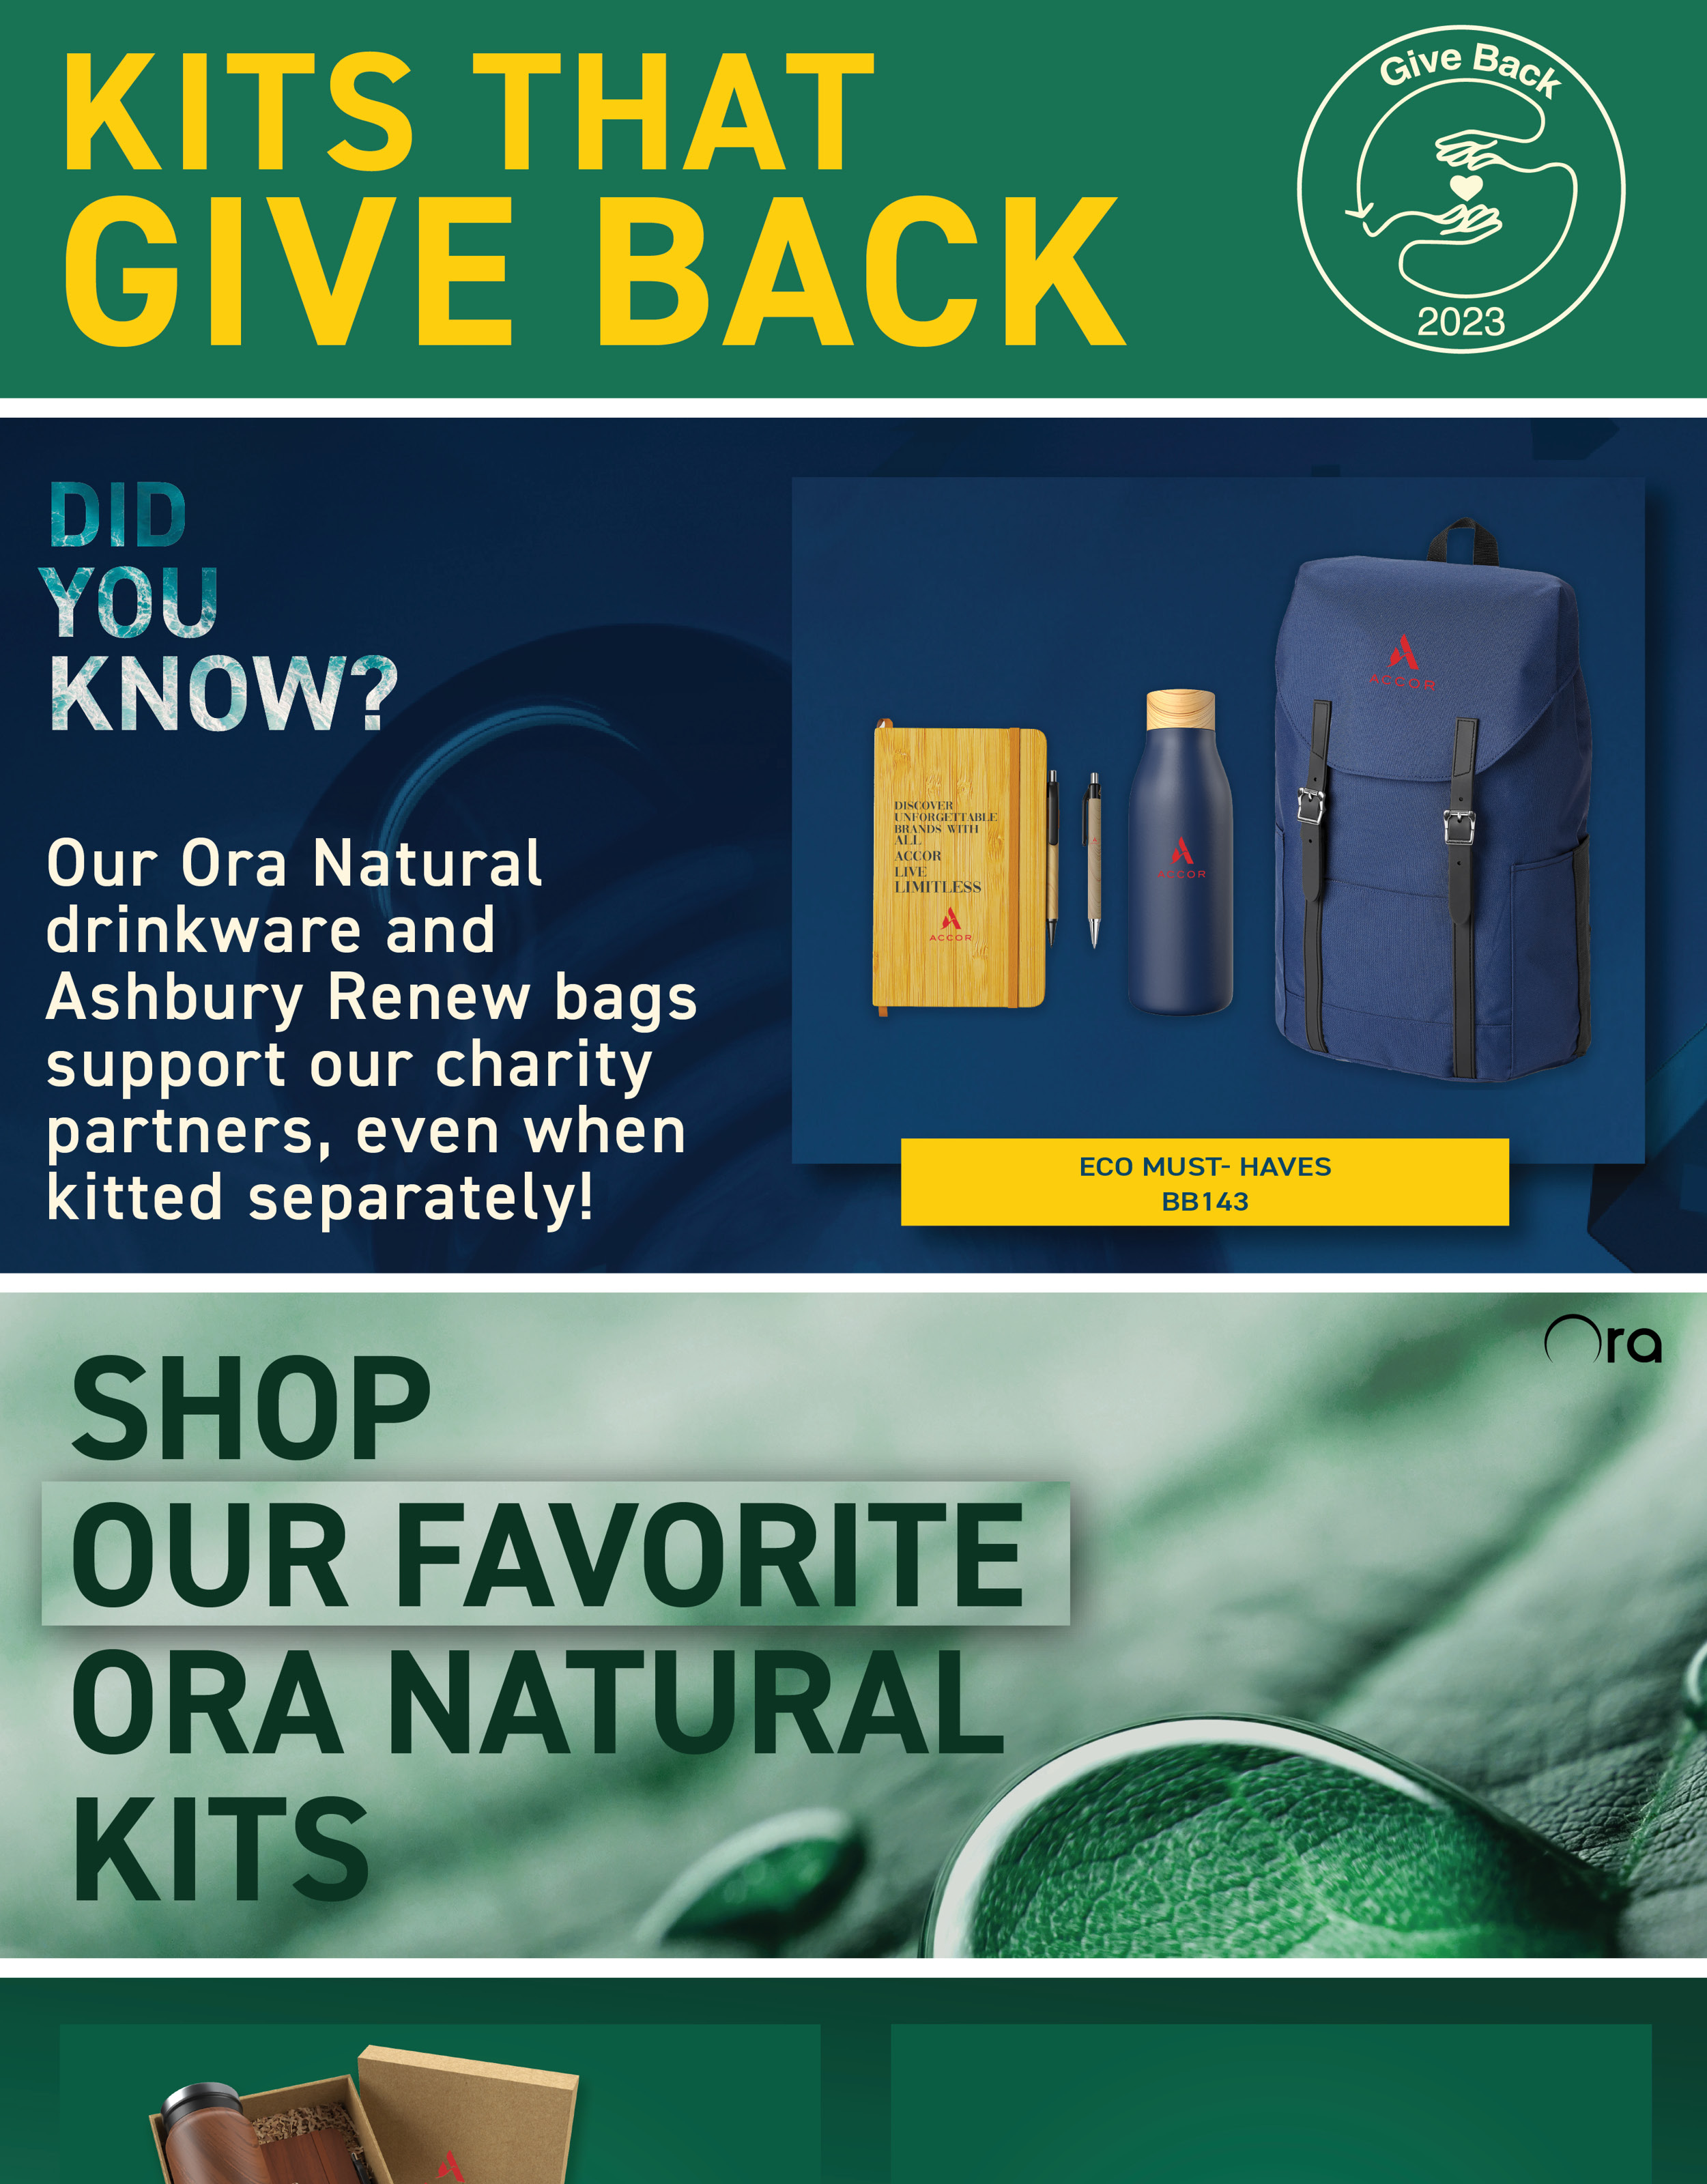 Kits that give back